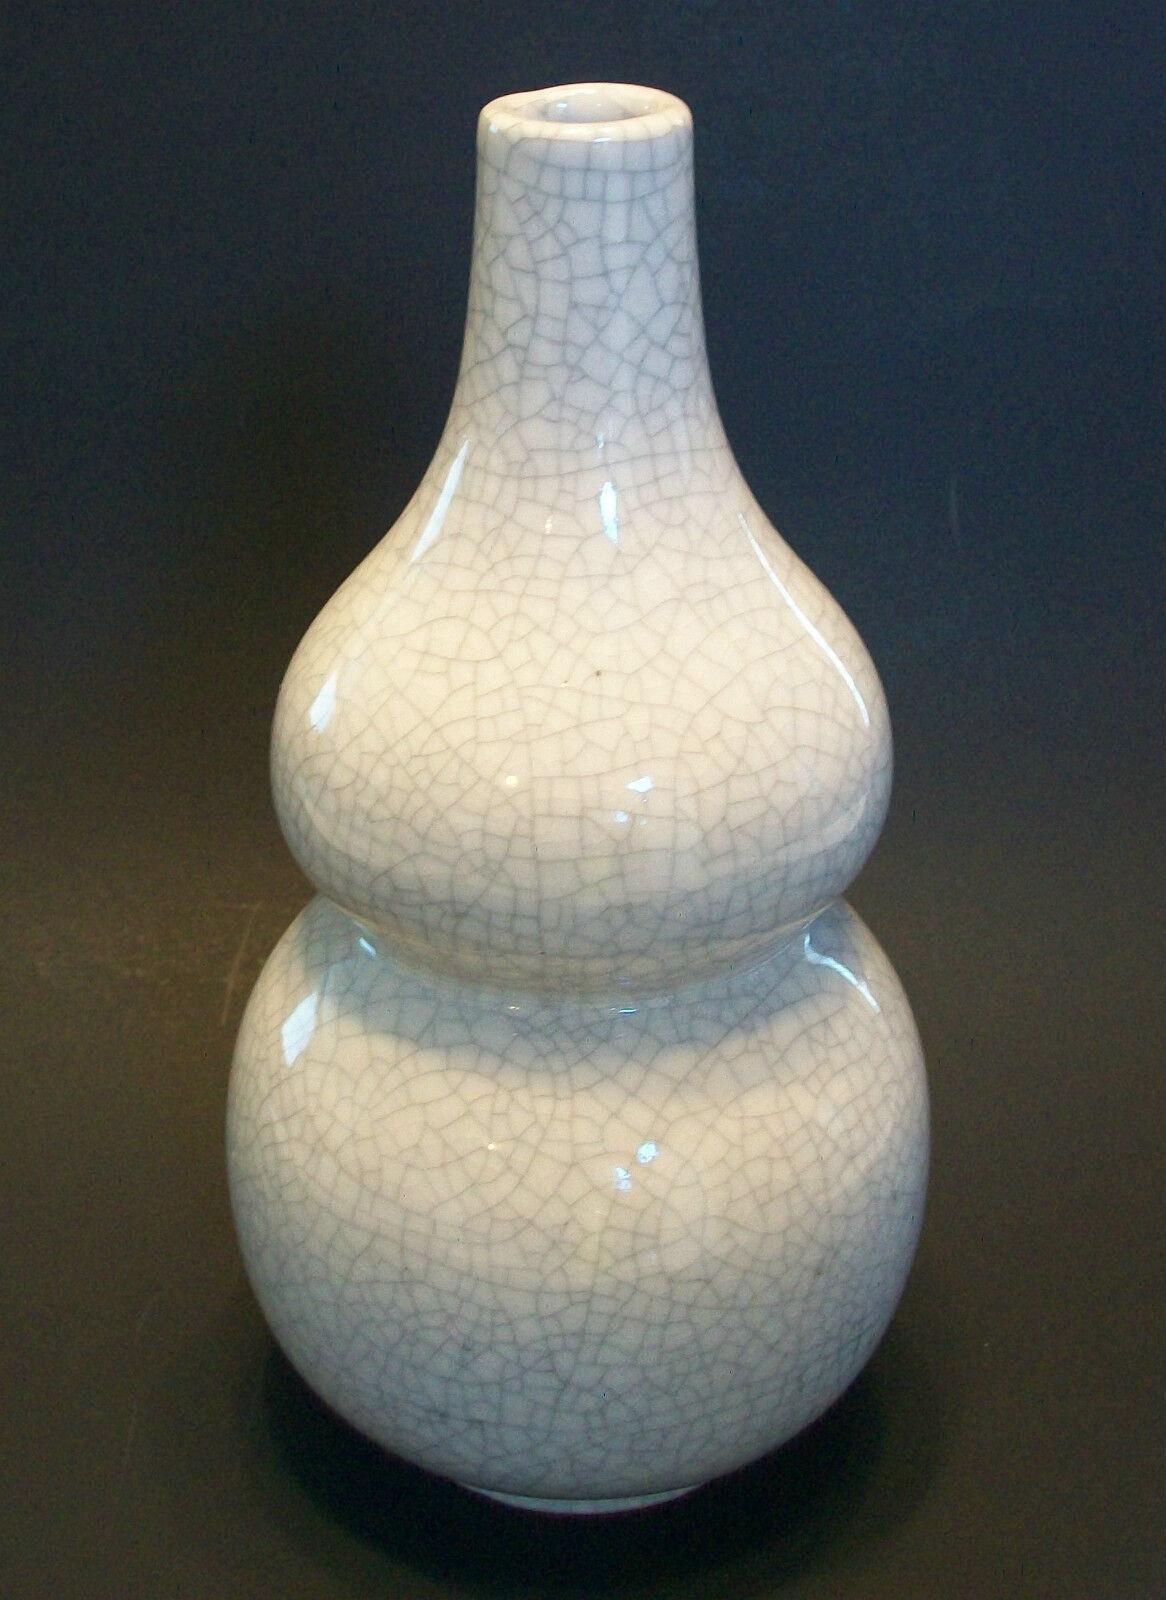 Ming Style Double Gourd Crackle Glaze Ceramic Vase - Signed - Mid-20th Century For Sale 2